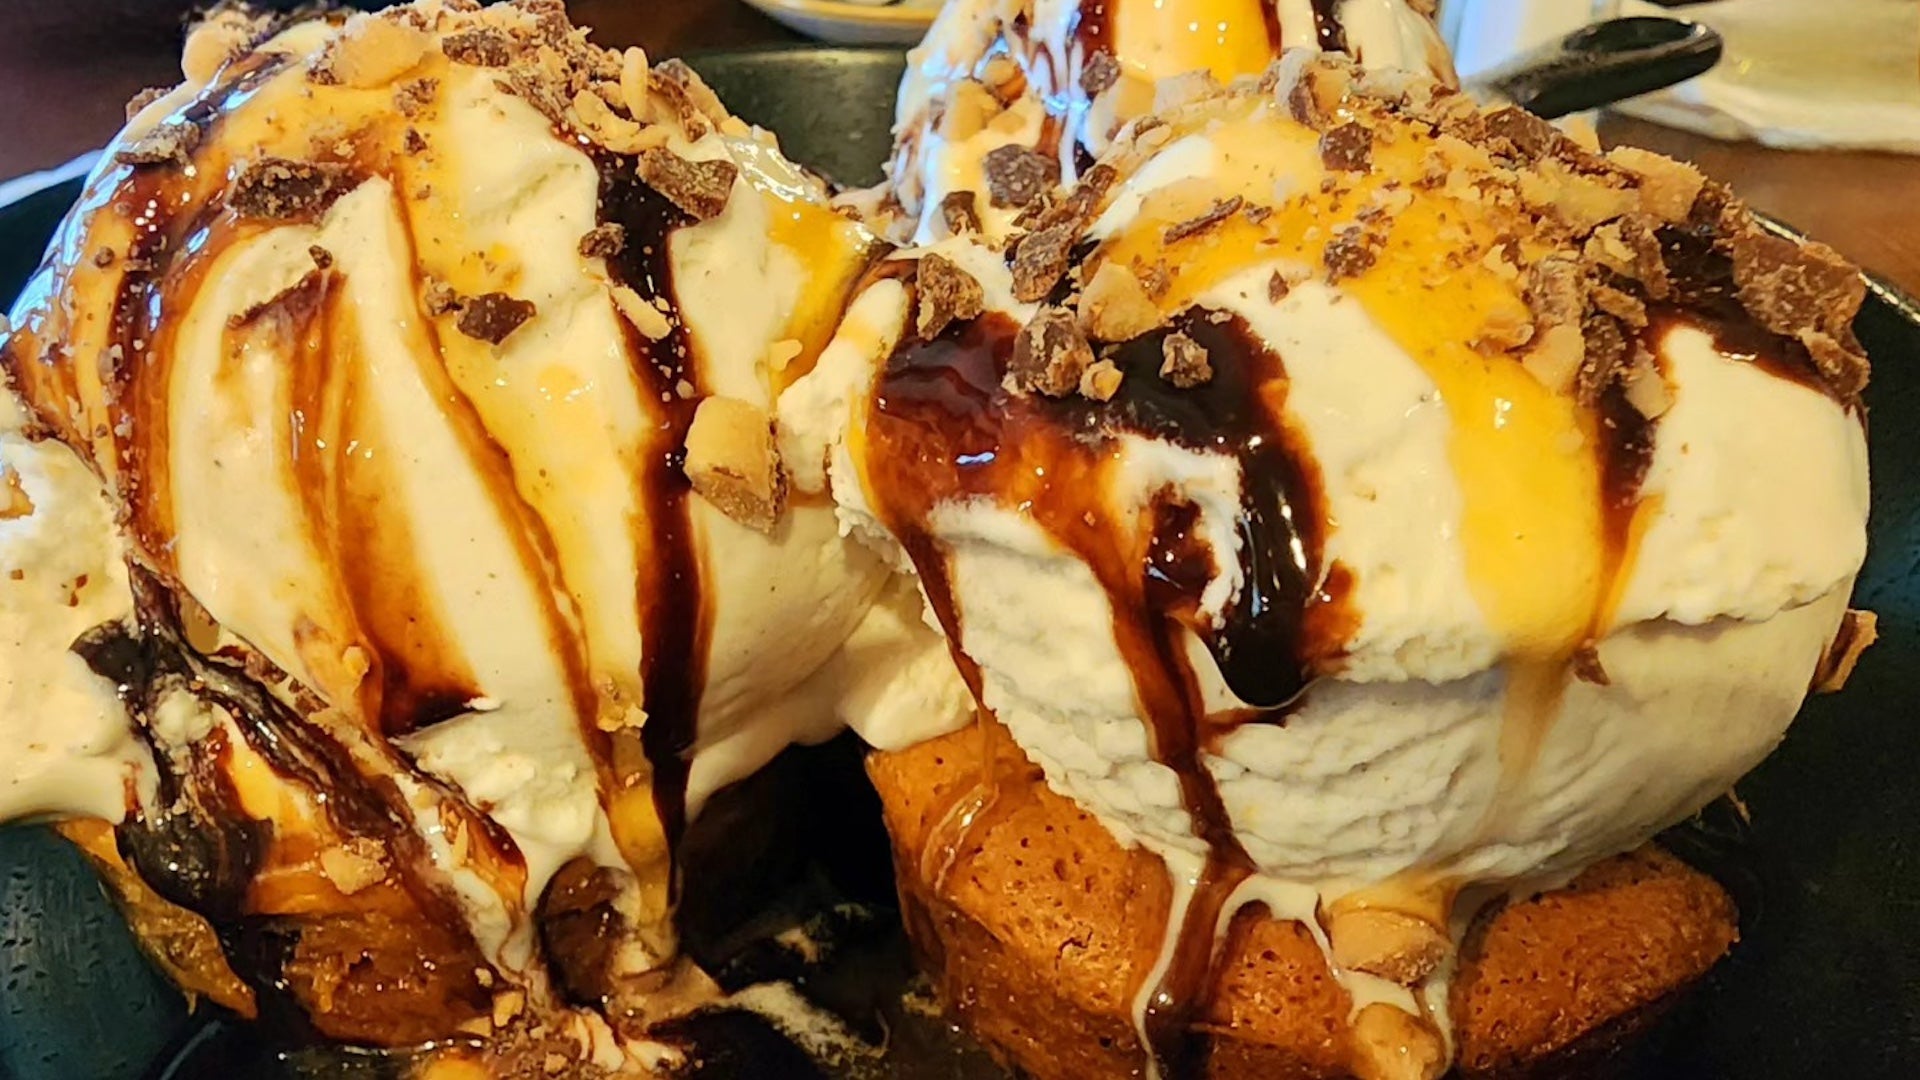 Ice cream dessert with caramel and chocolate drizzle